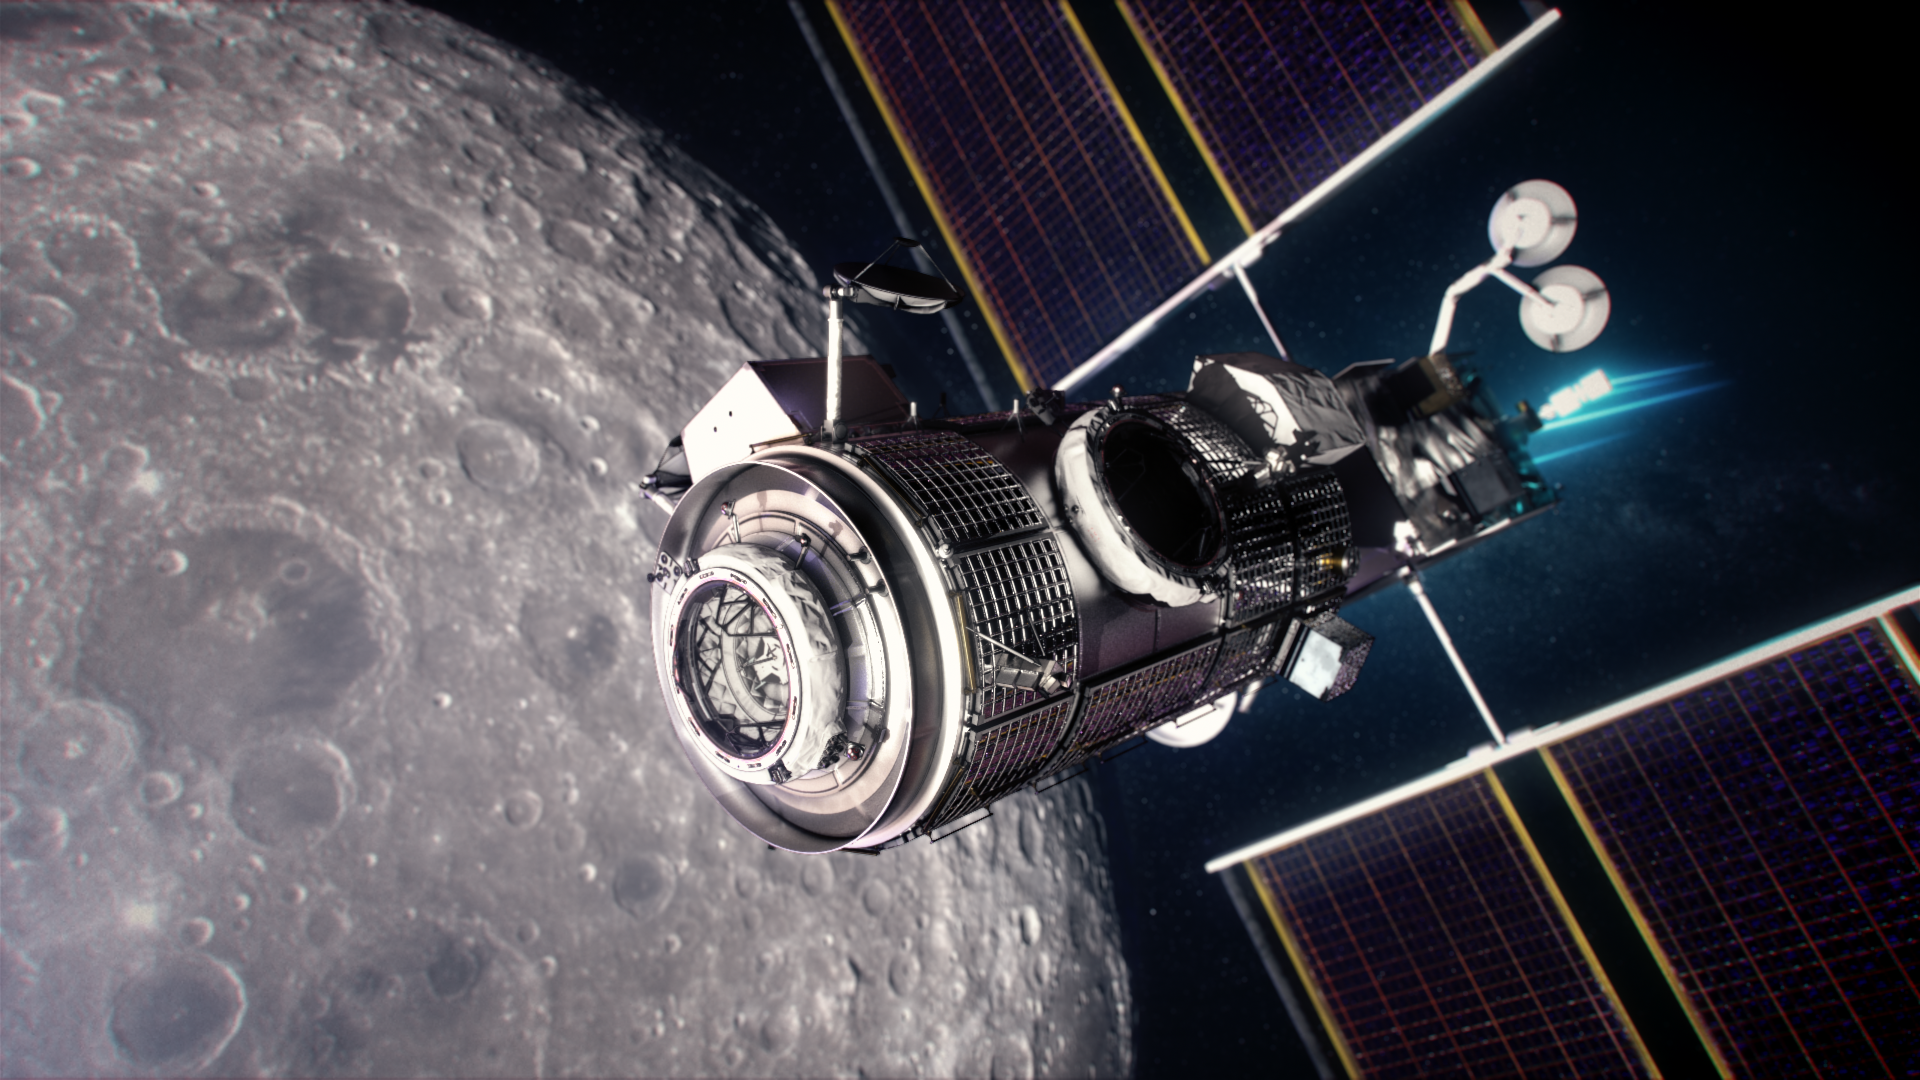 Northrop Grumman will base the design of their low Earth orbit space station on the lunar habitat for NASA.